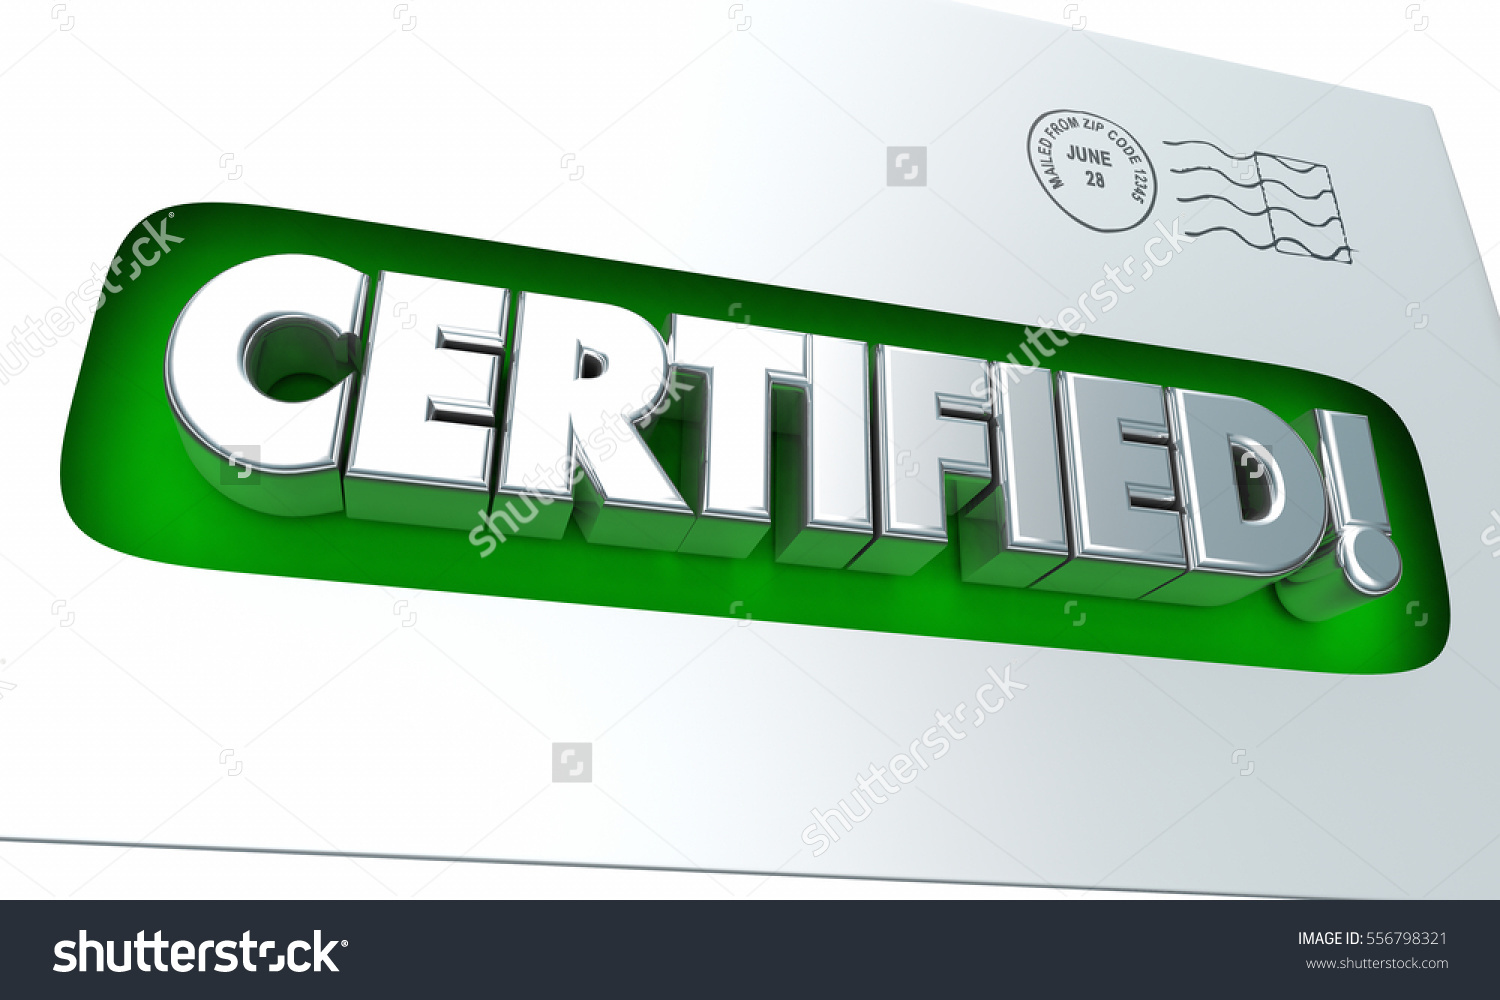 stock-photo-certified-licensed-official-envelope-authorized-d-illustration-556798321